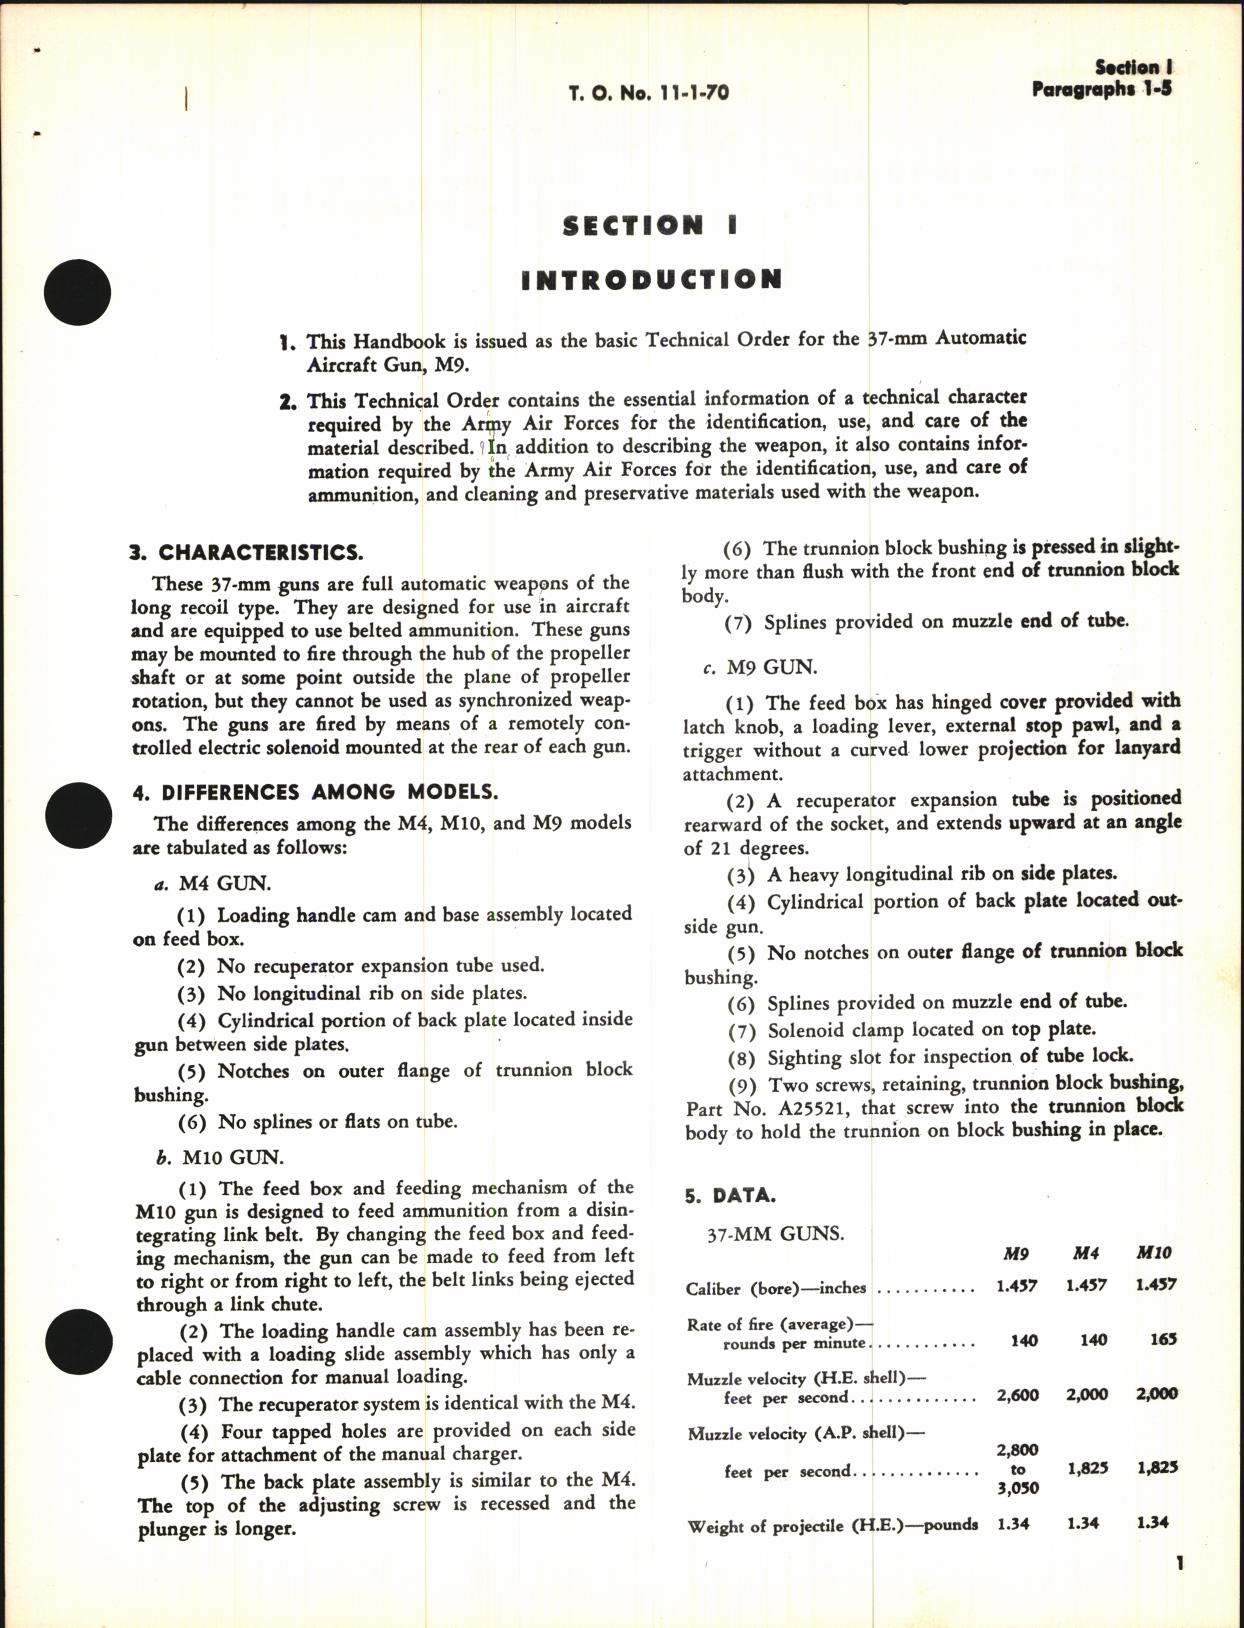 Sample page 5 from AirCorps Library document: Handbook of Instructions with Parts Catalog for 37 MM Automatic Aircraft Gun M9